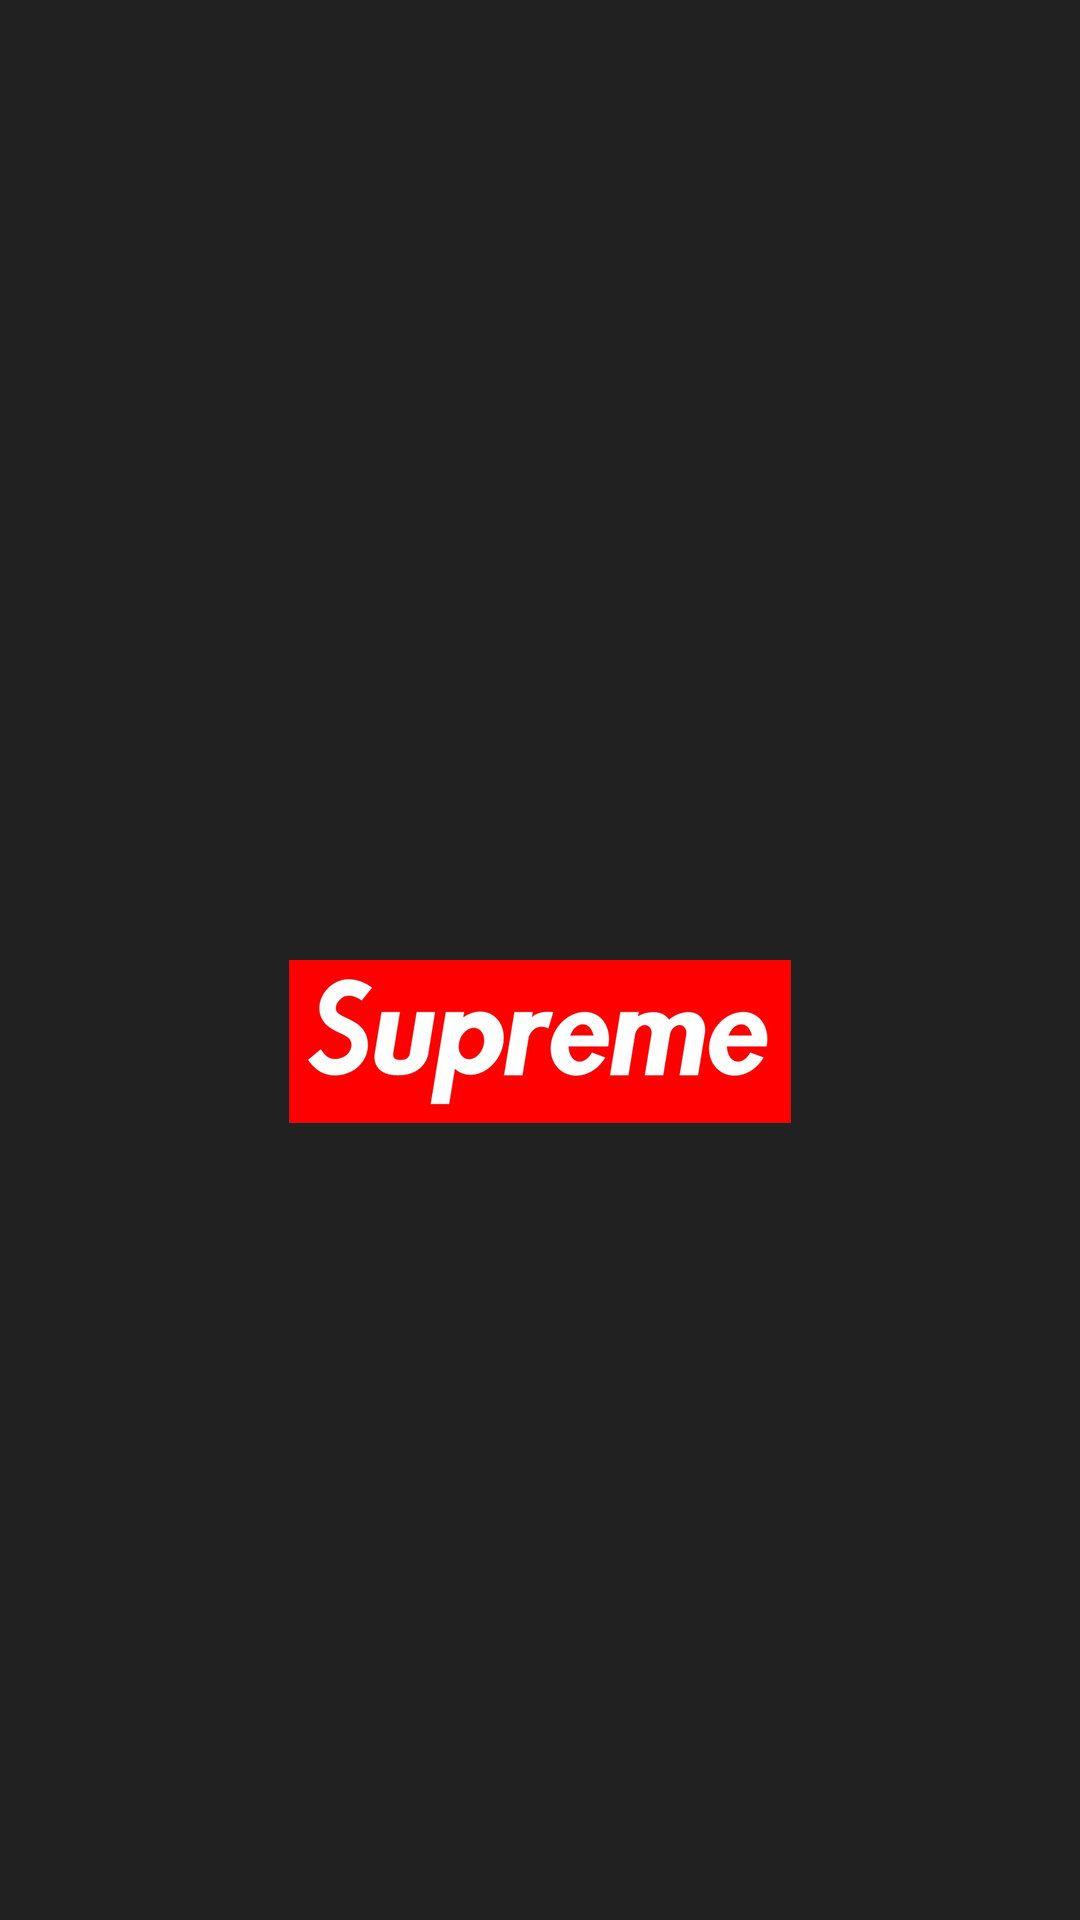 Supreme Iphone 5s Wallpapers Top Free Supreme Iphone 5s Backgrounds Wallpaperaccess